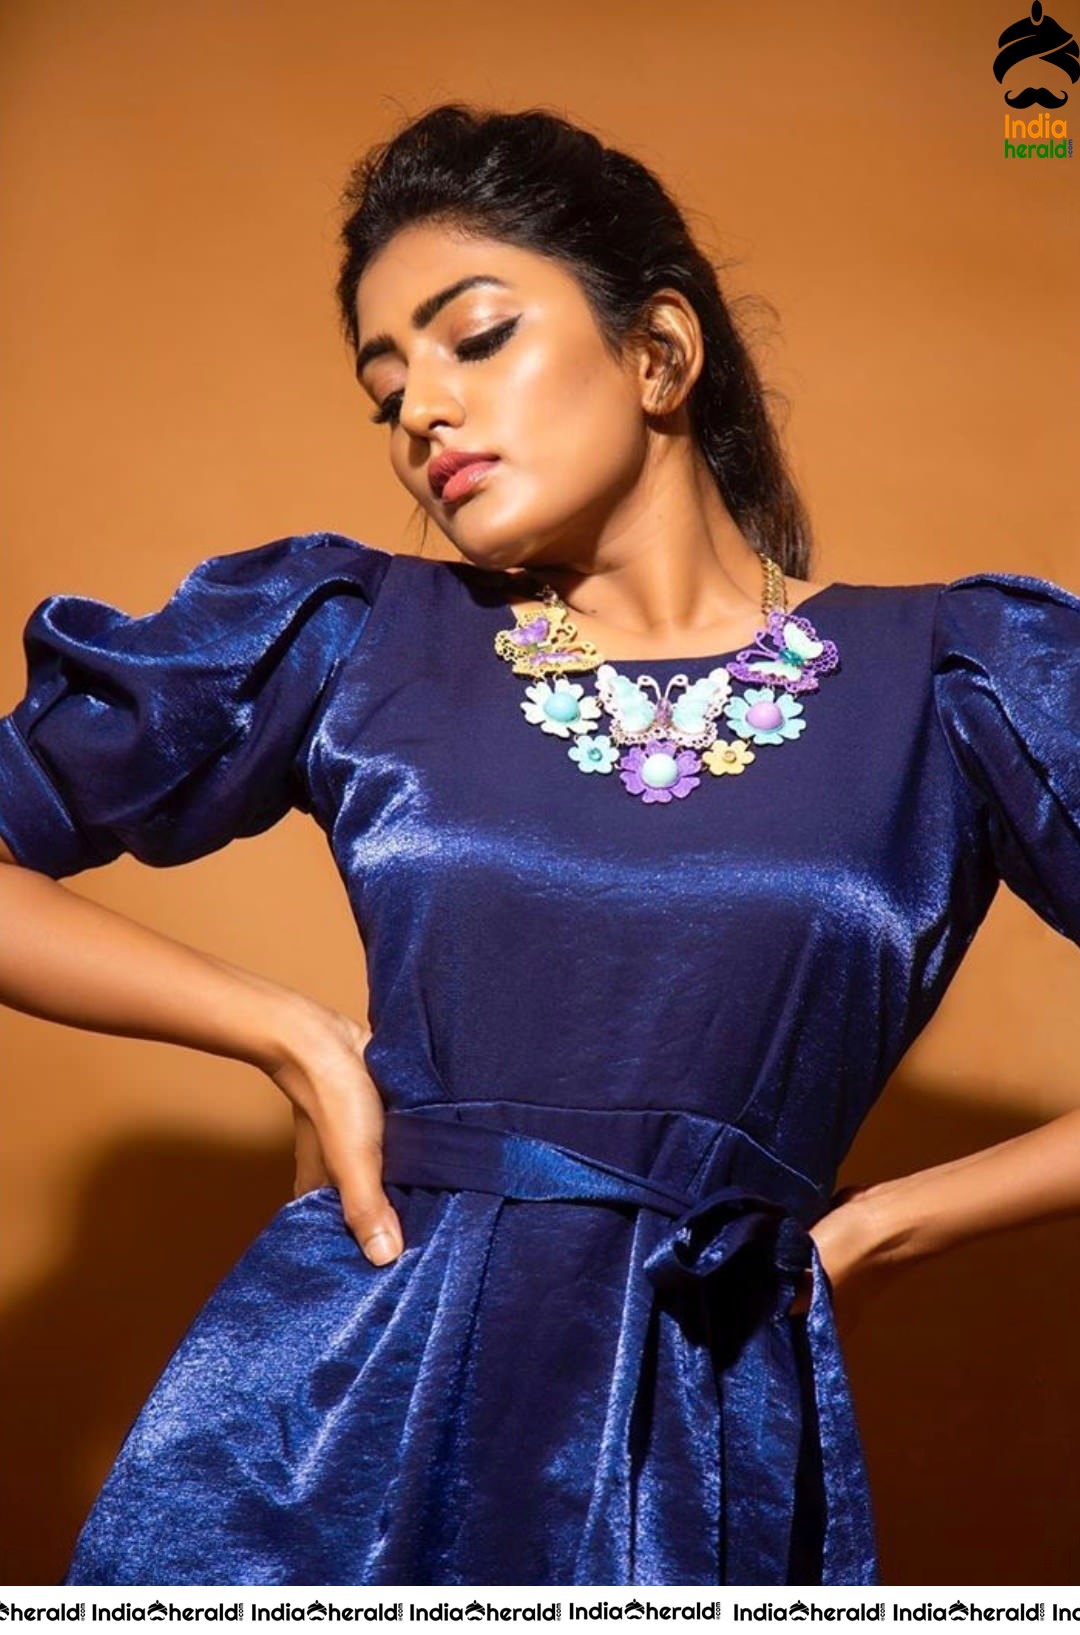 Eesha Rebba Looking Delicious in this Photoshoot